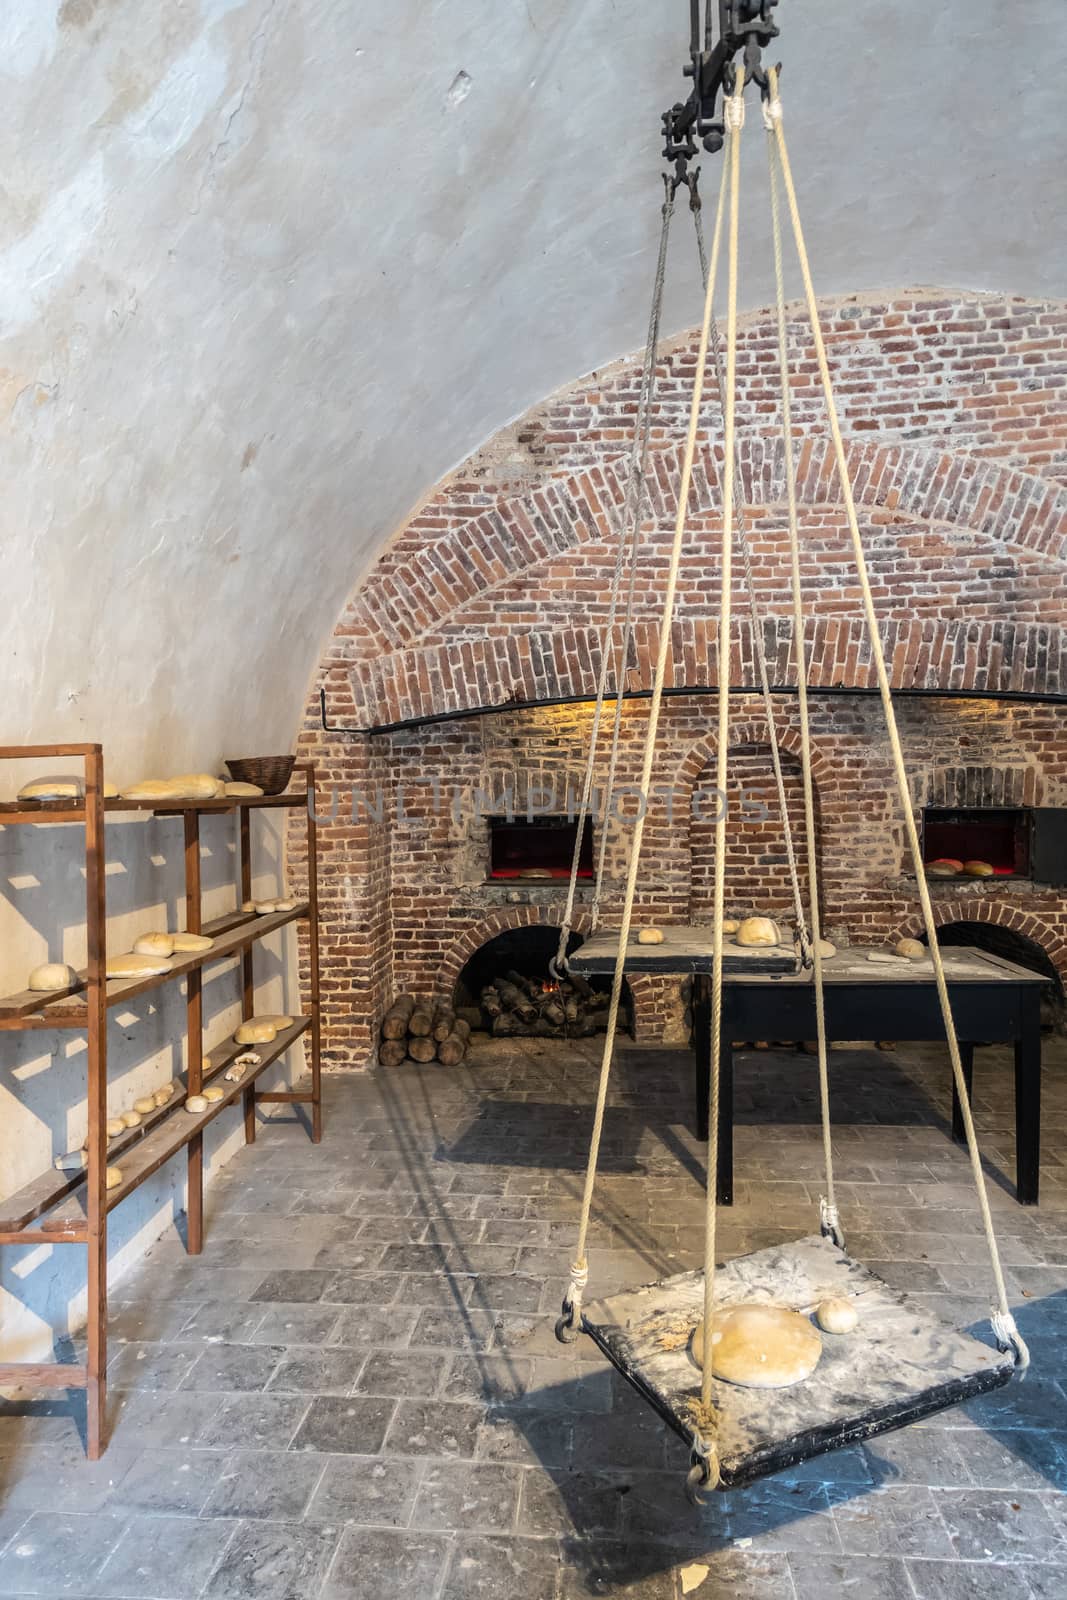 Dinant, Belgium - June 26, 2019: Inside Citadelle. Part of historic bakery with shelves of bread, several open brick stone ovens, and a giant balance to weigh dough. White walls and ceililng.